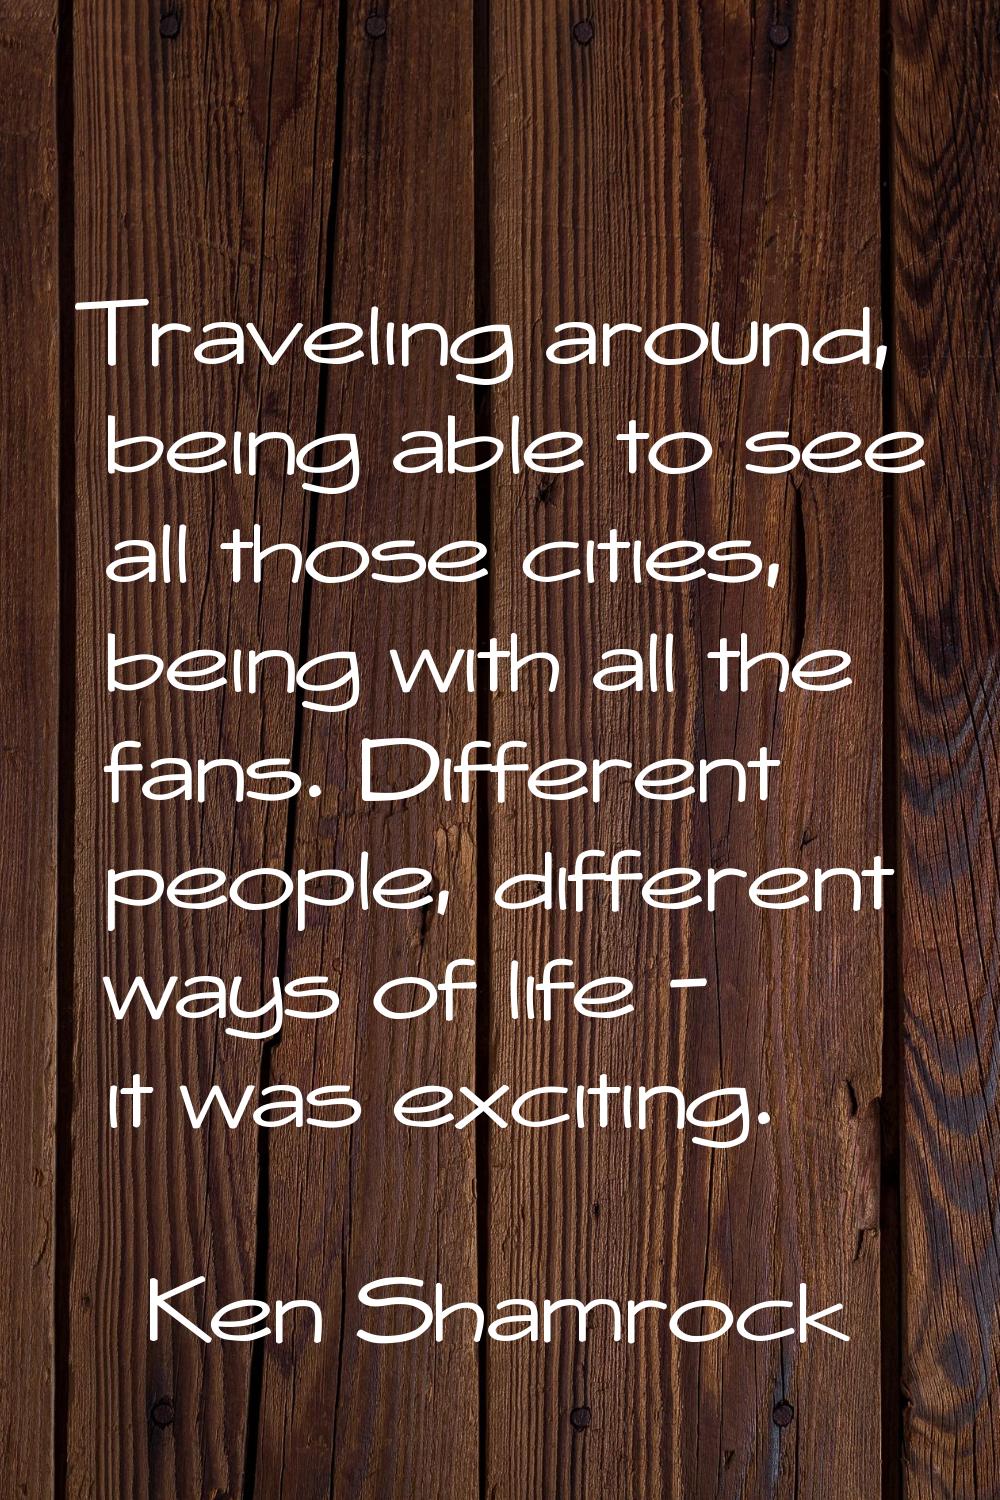 Traveling around, being able to see all those cities, being with all the fans. Different people, di